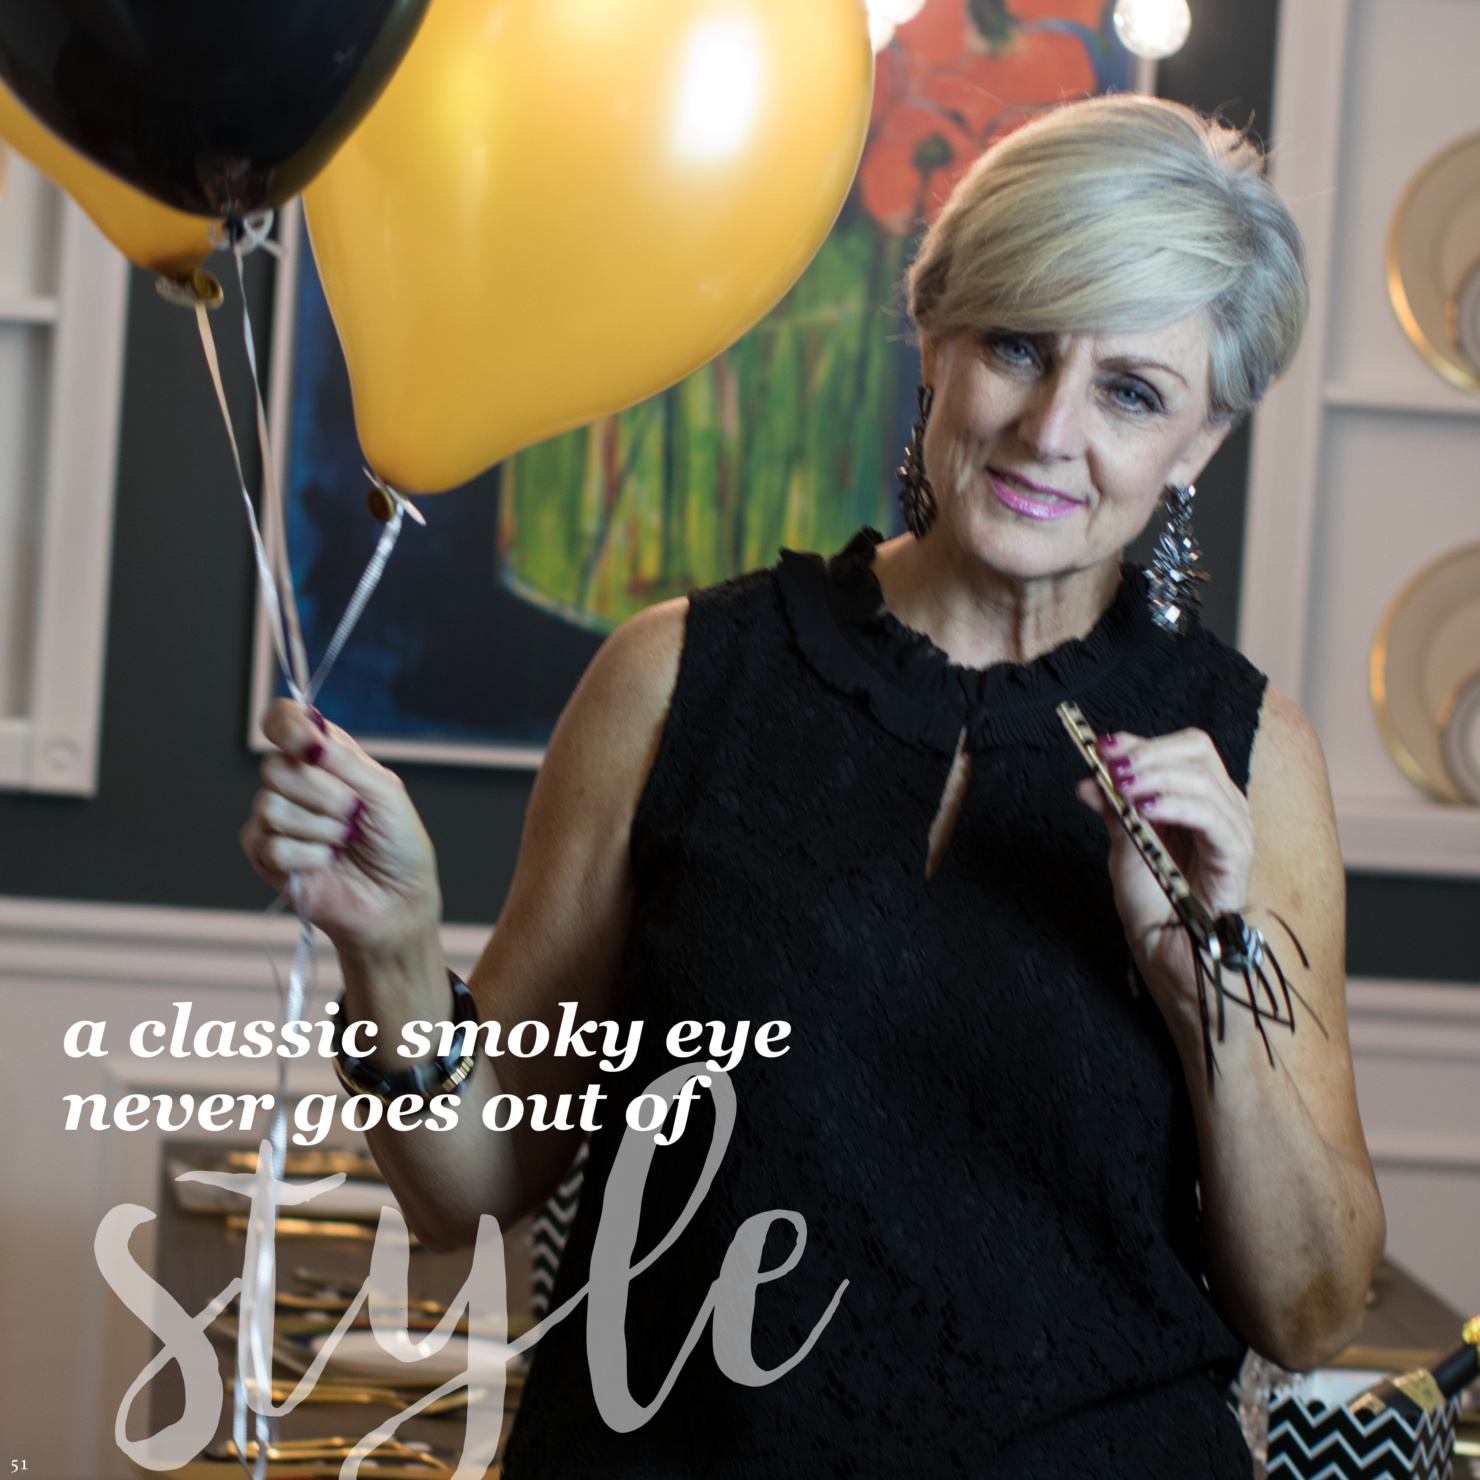 Home for the Holidays - an eMagazine presented by Style at a Certain Age